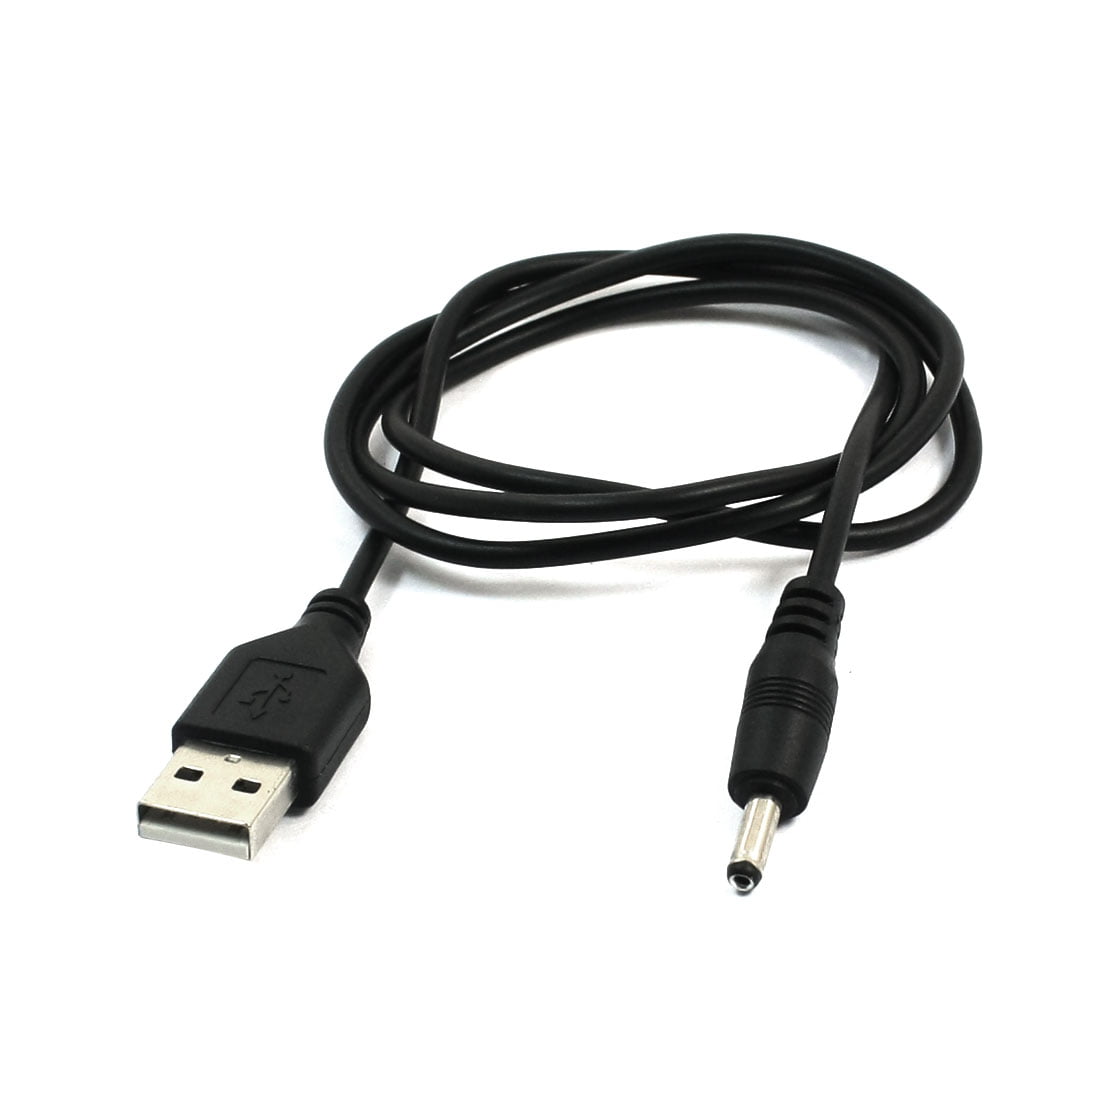 USB 2.0 Male A To DC 3.5mm x 1.35mm Plug DC Power Supply Cord Socket Cable 